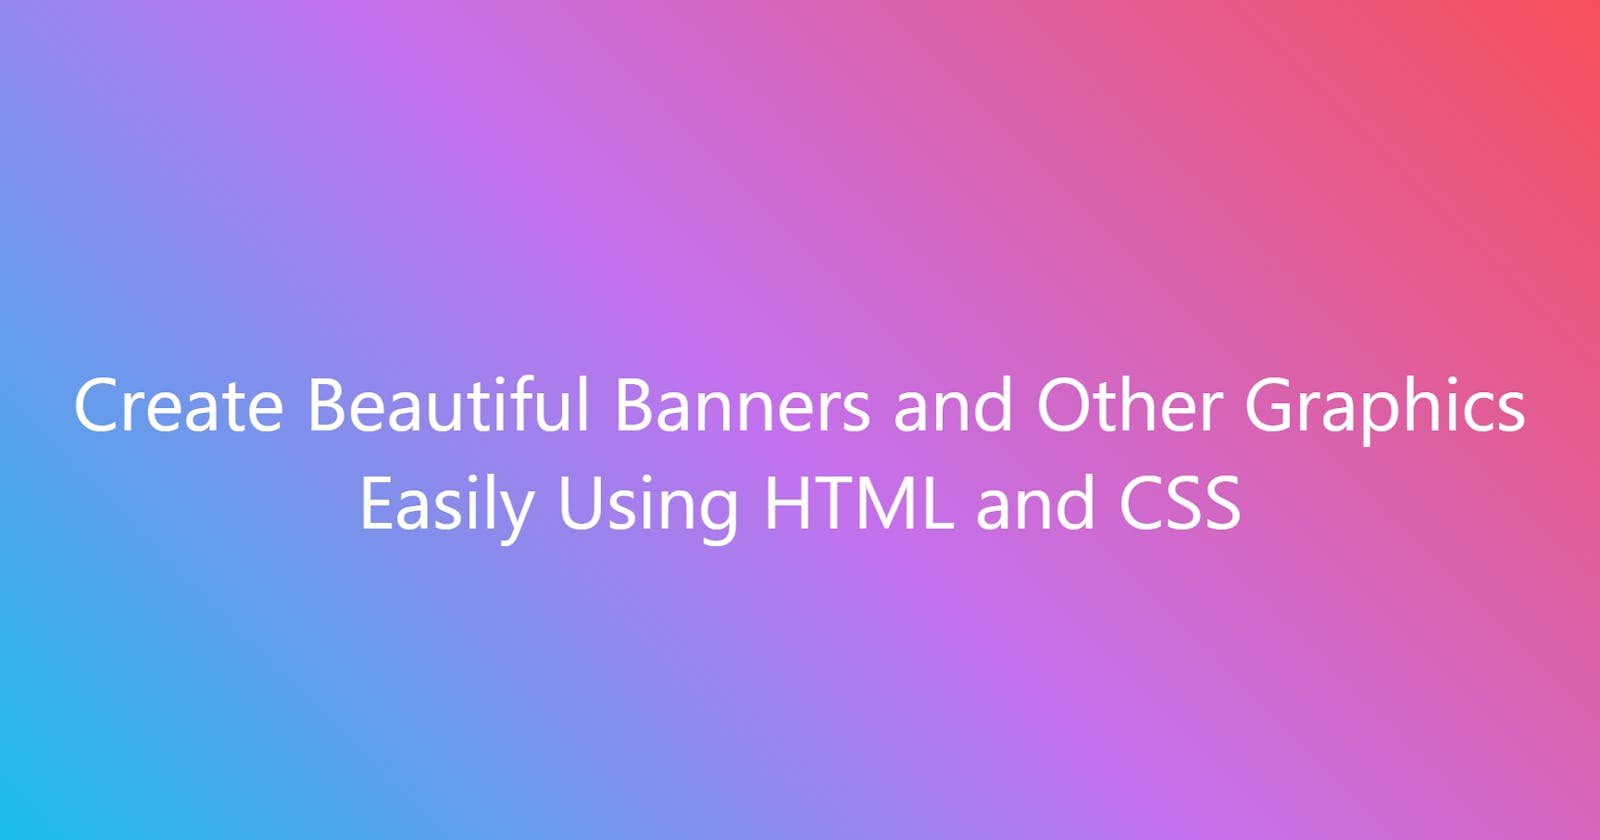 Create Beautiful Banners and Other Graphics Easily Using HTML and CSS